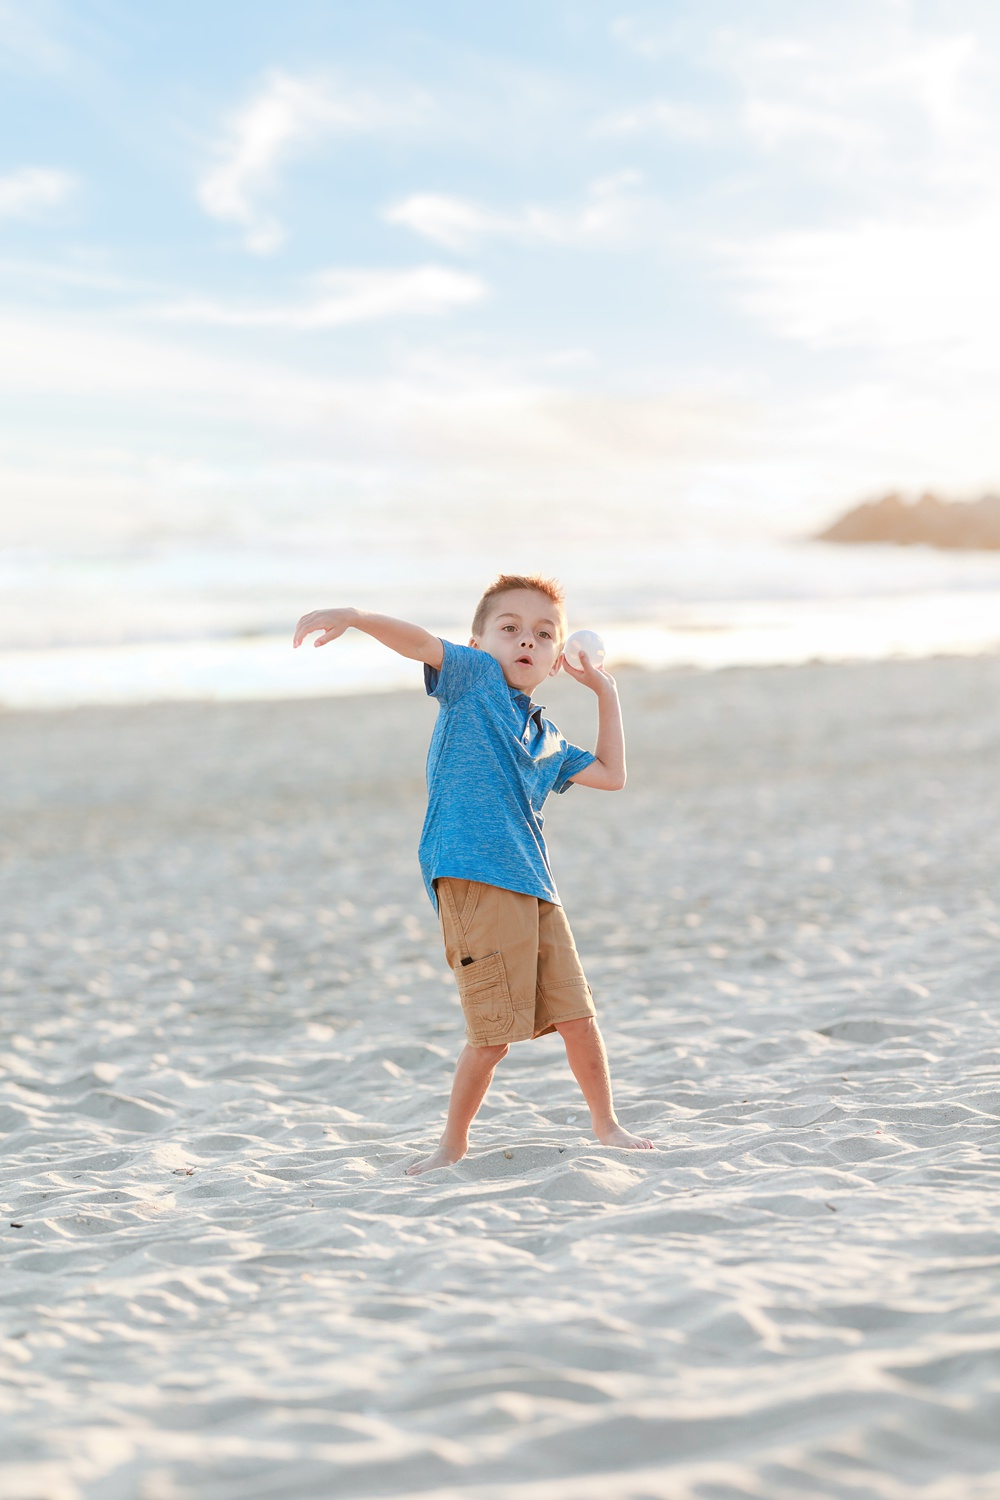 Extended Family Portraits at the Hotel del Coronado | 4 Years Later ...